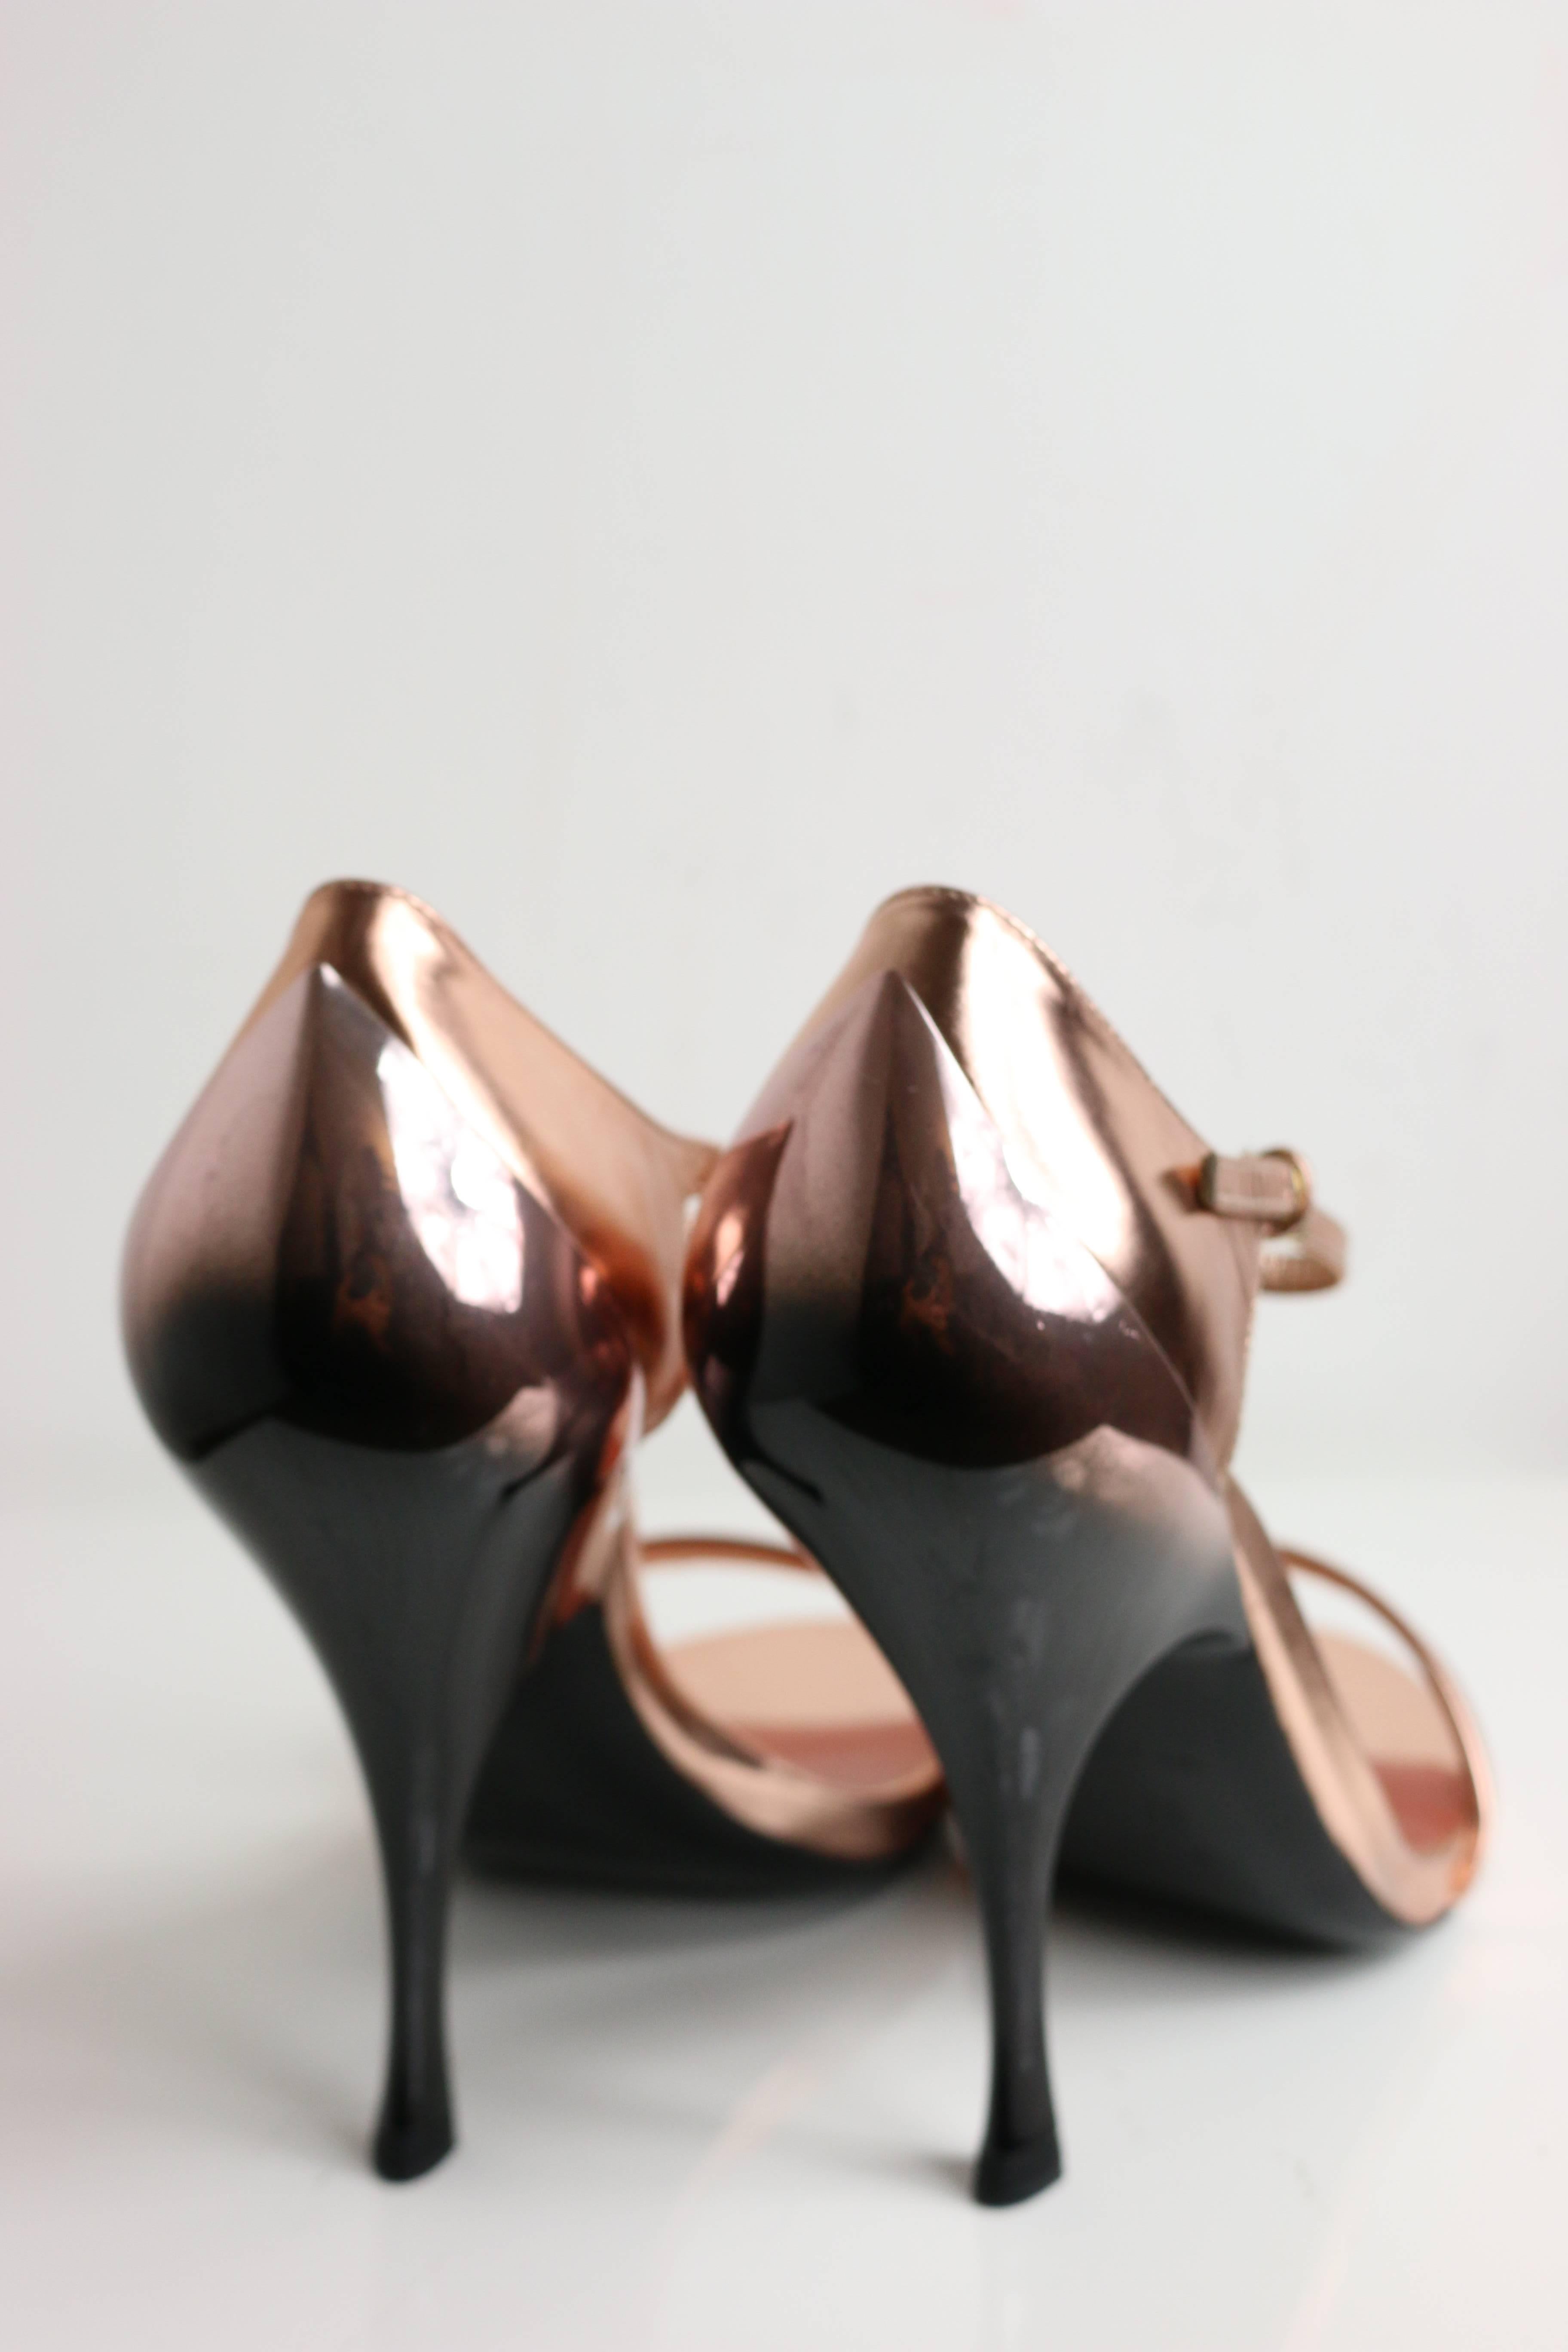 - Miu Miu rose gold metallic leather sandals featuring a mirror like heels. 

- Made in italy. 

- SIze 39. 

- Length: 7in I Heels: 6.5in (measurements are approximate). 

